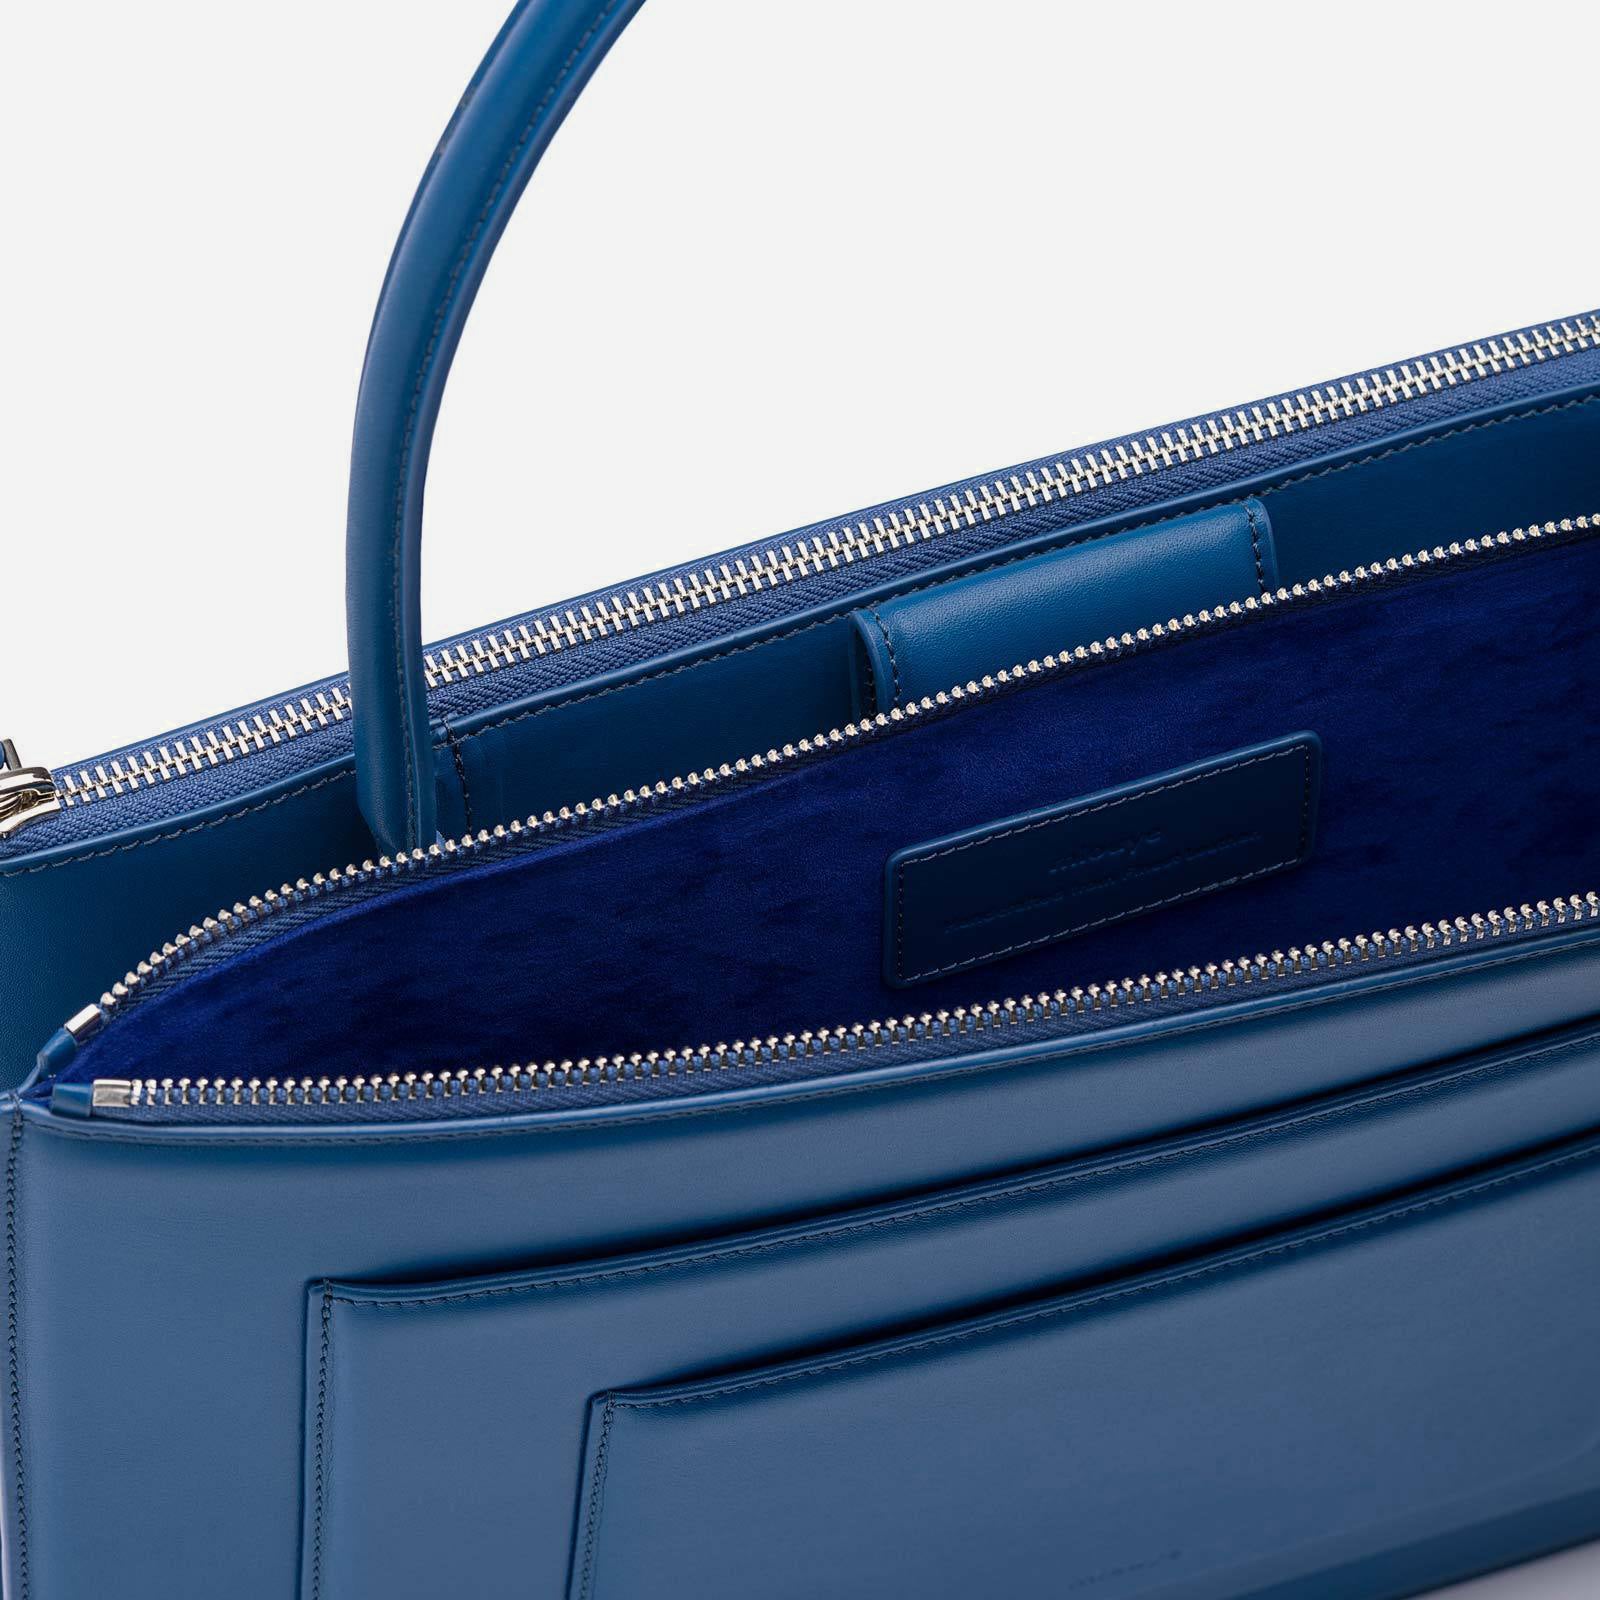 Detail view of blue purse's zipper enclosure and suede interior